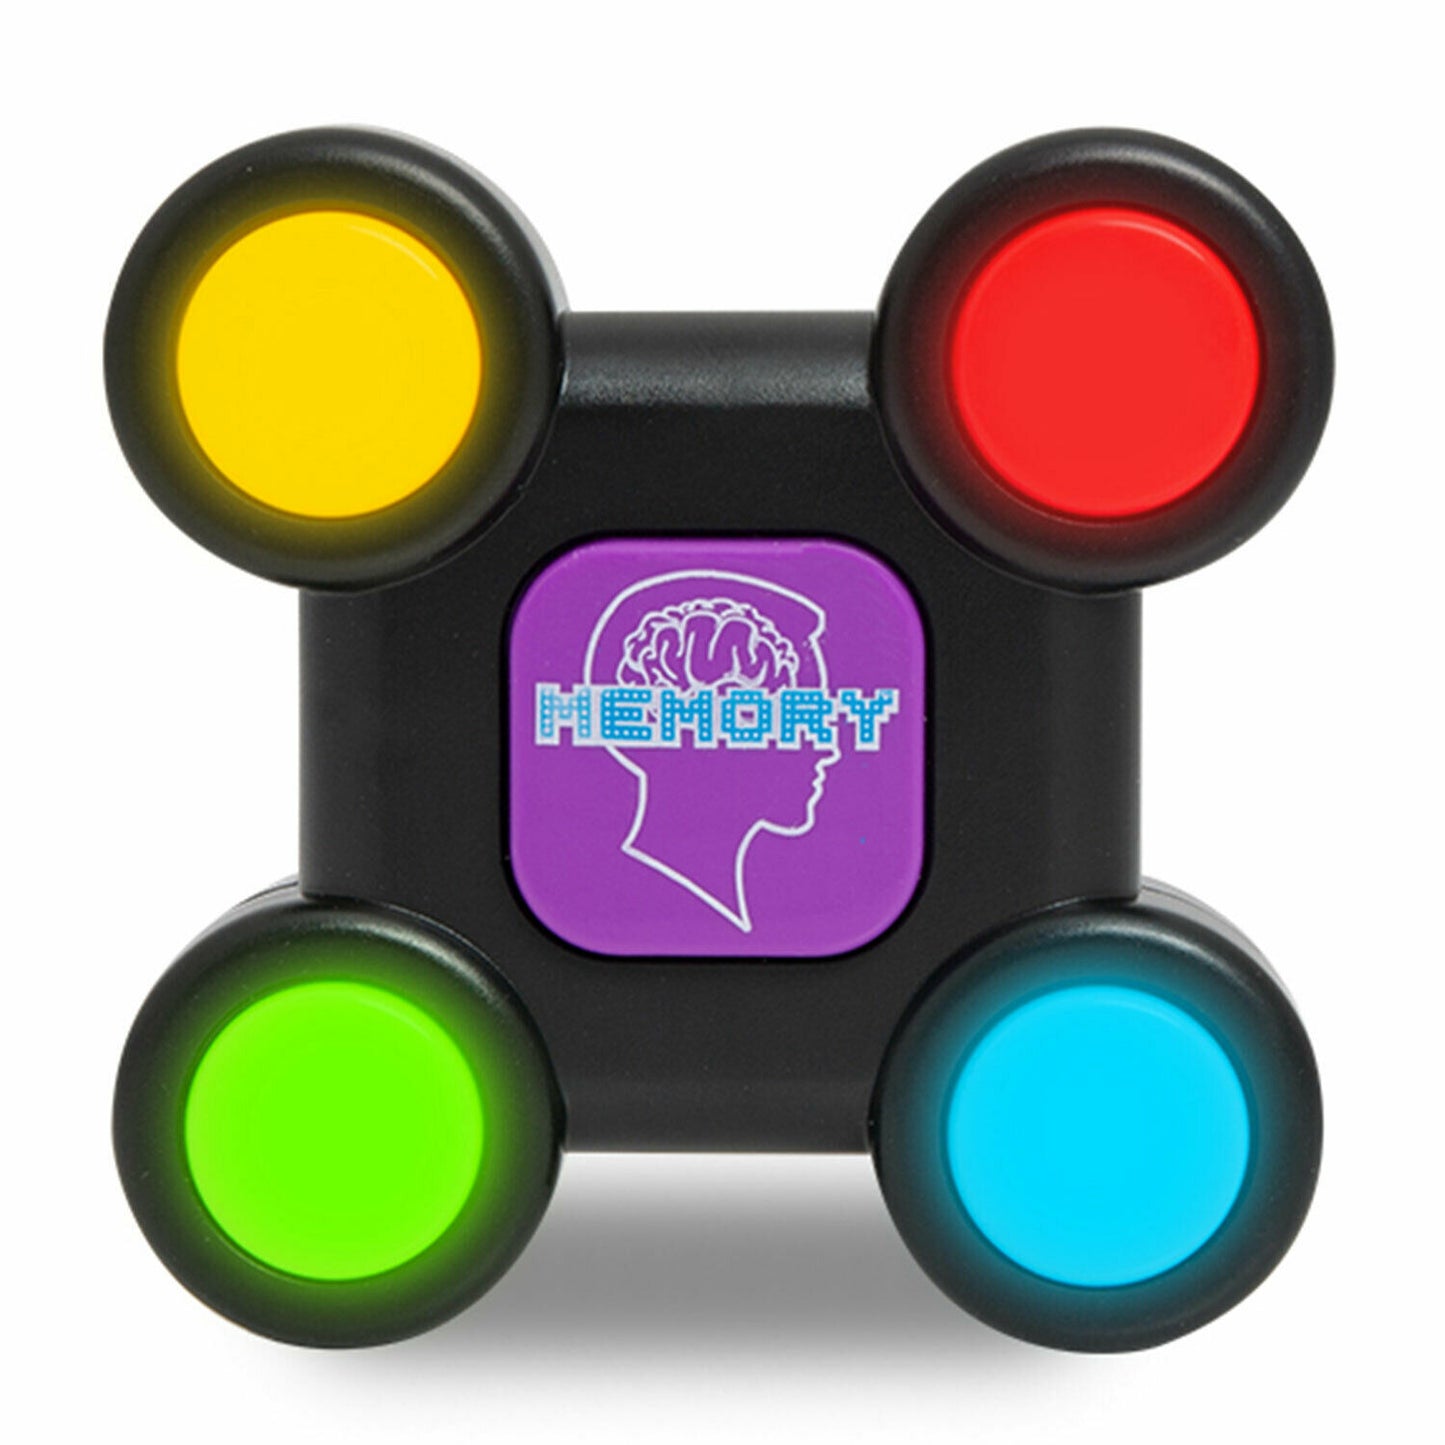 Early Educational Memory Game with Lights Sounds Toy Kids Interactive Toy Button Press Training Hand Brain Coordination Toys